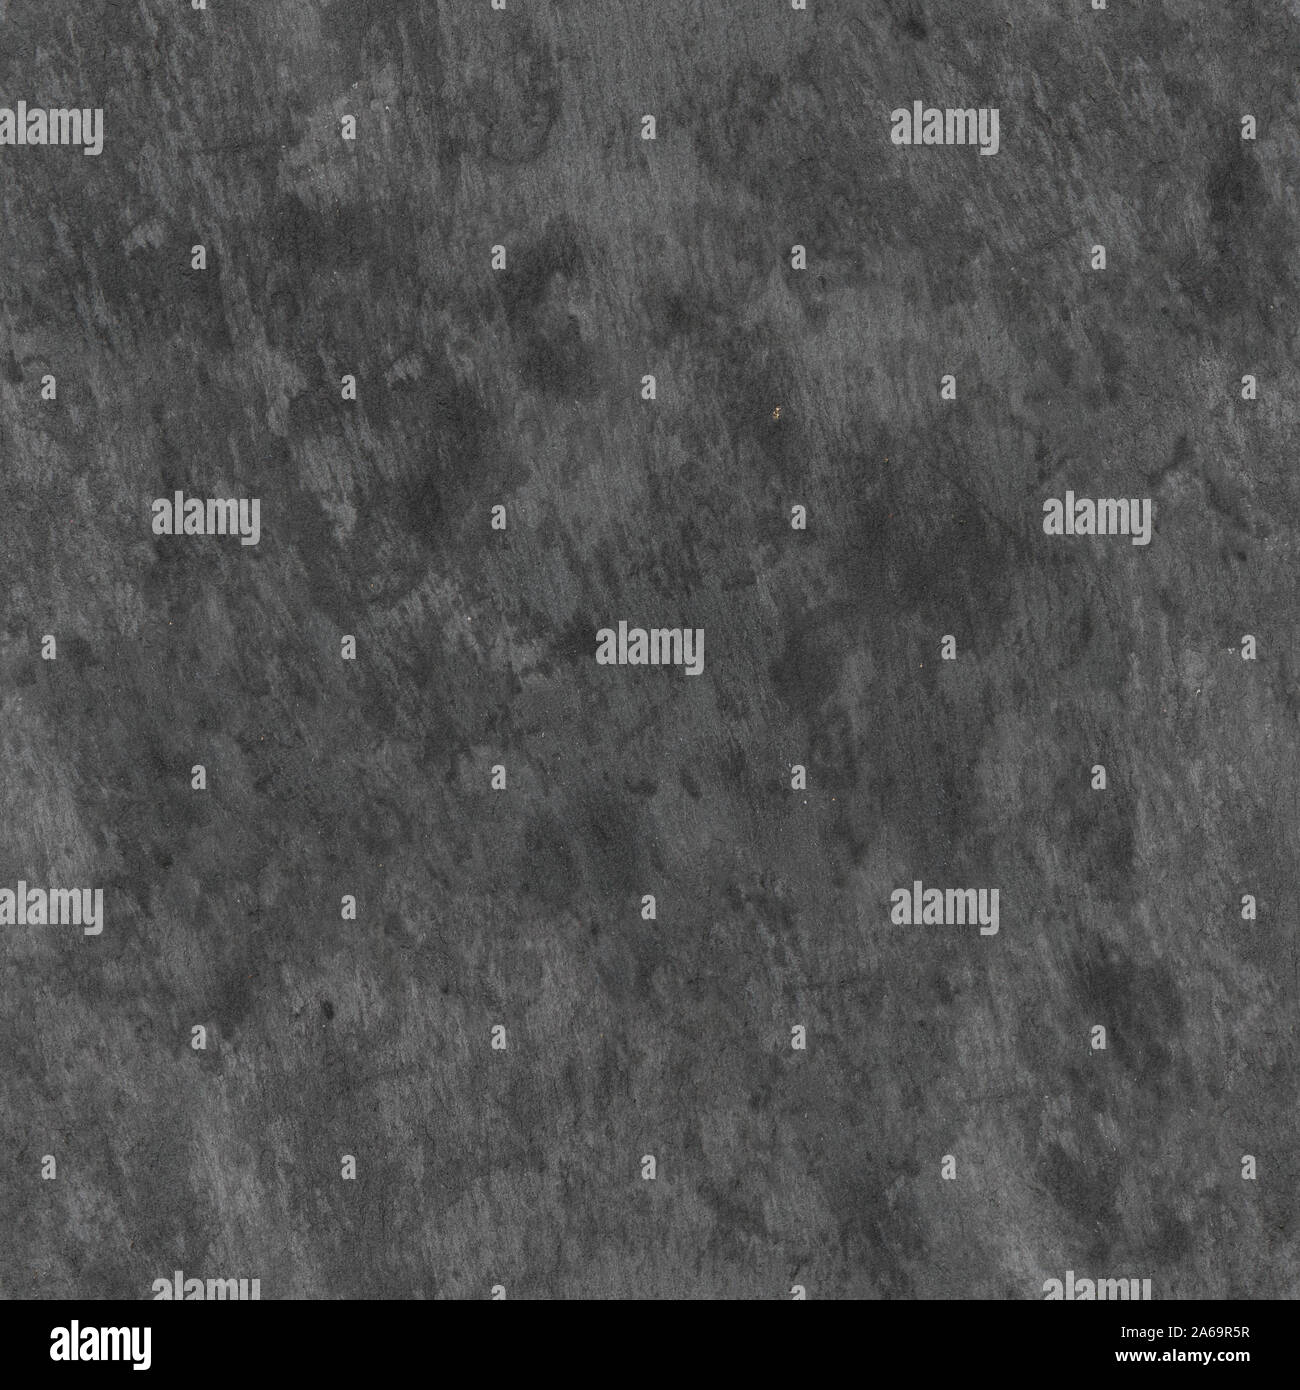 Seamless texture of grey slate plate with wet spots. Stock Photo